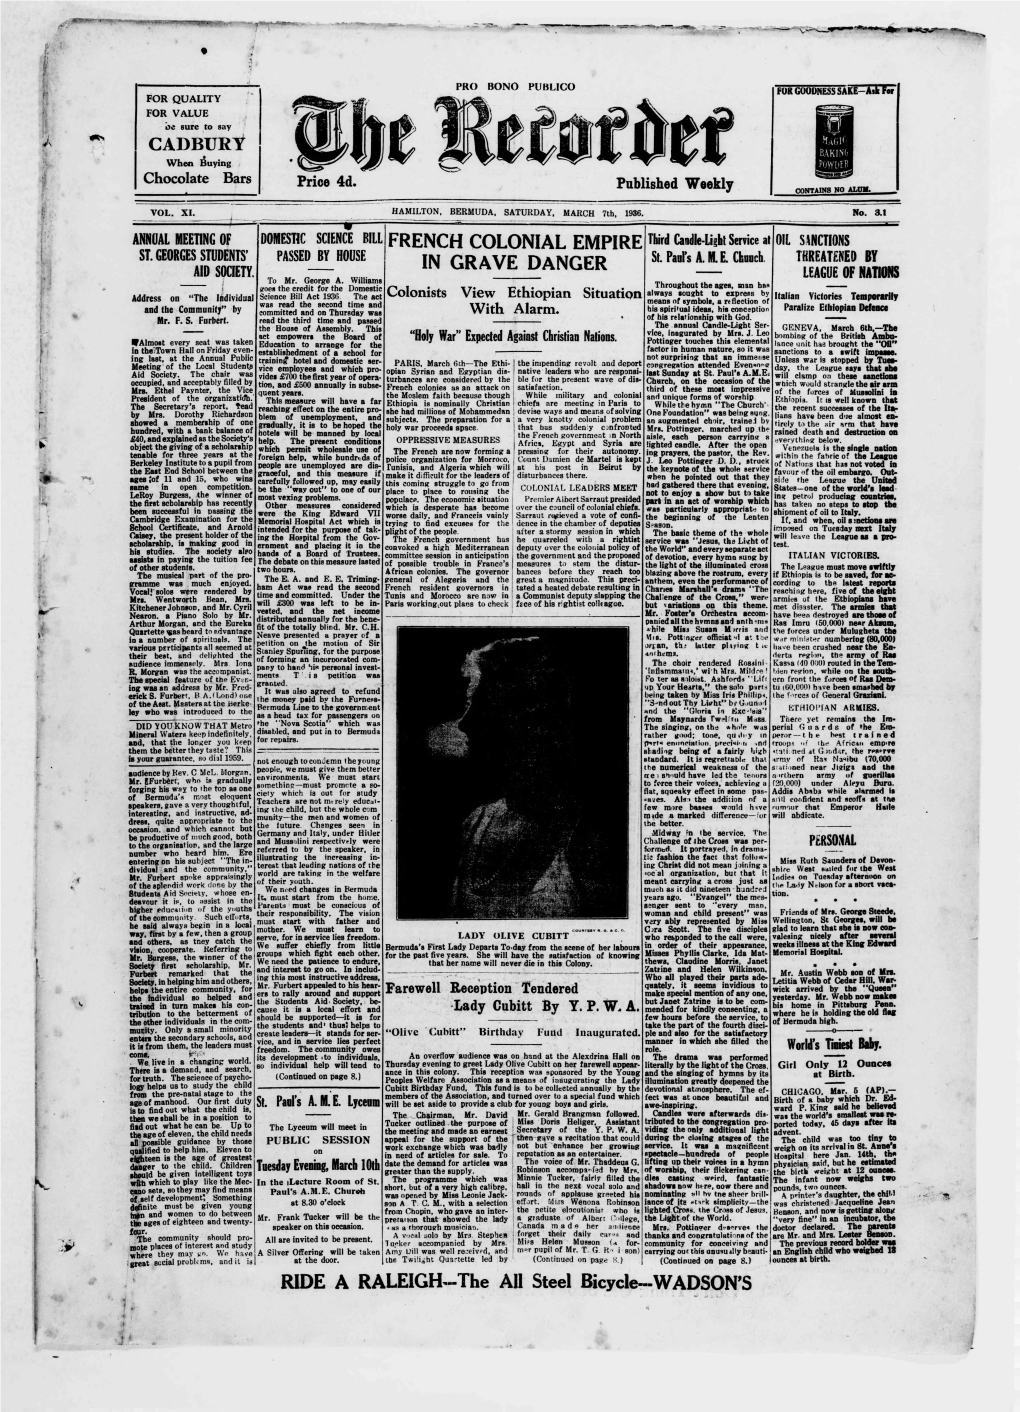 WADSON's Page Two the RECORDER, SATURDAY, MARCH 7Th, 1936